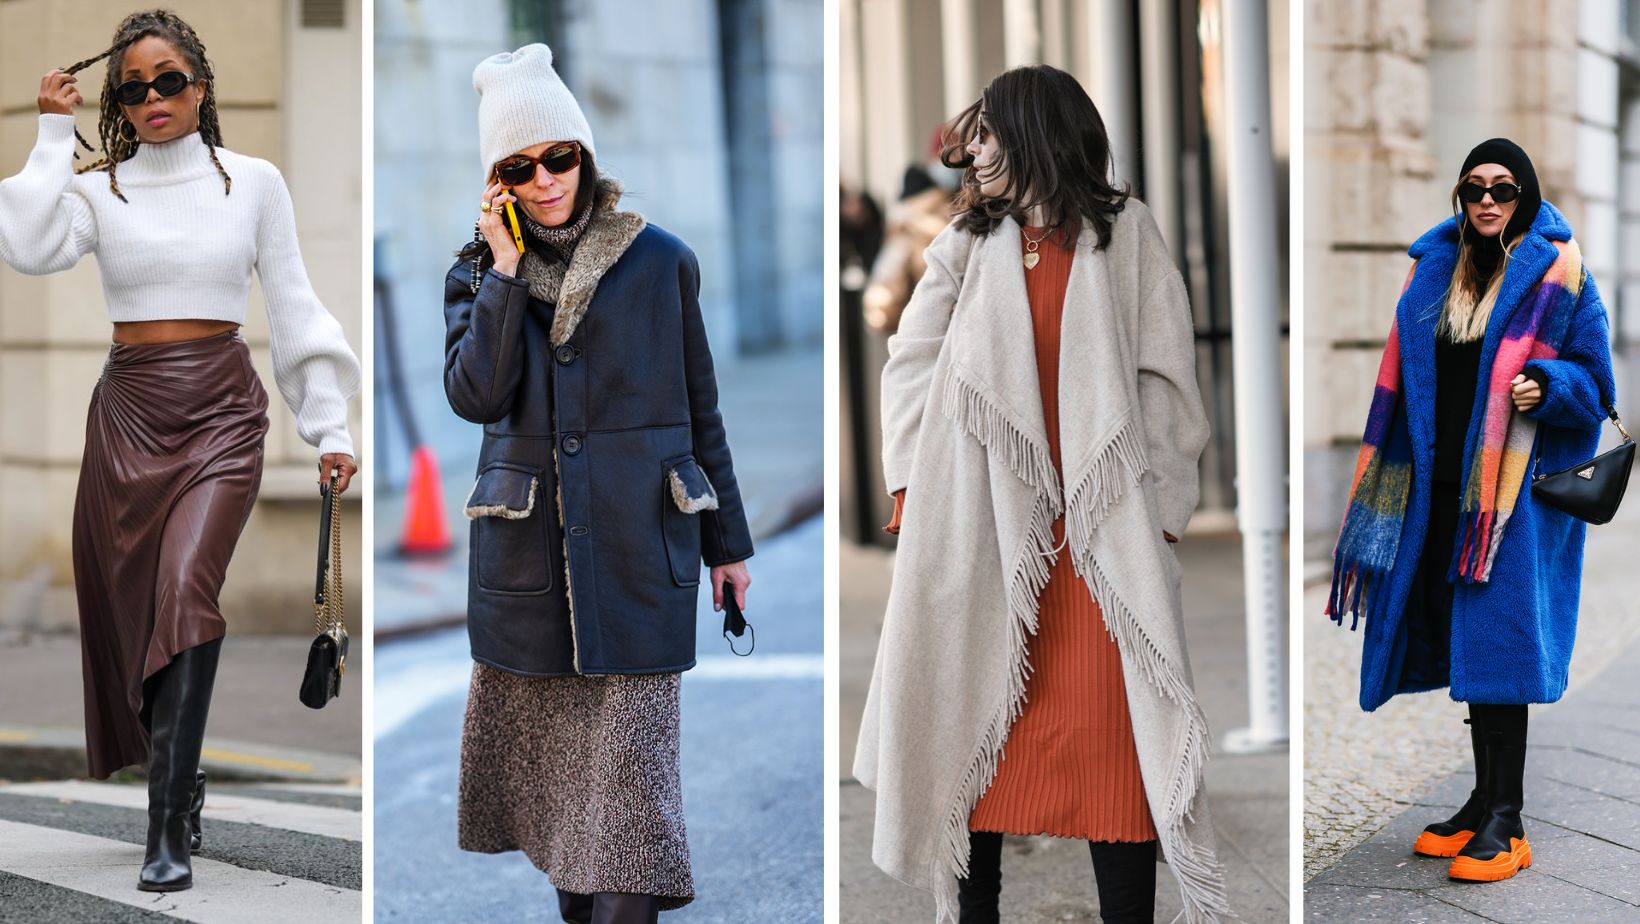 Winter Outfit Ideas That Are Chic And Feminine